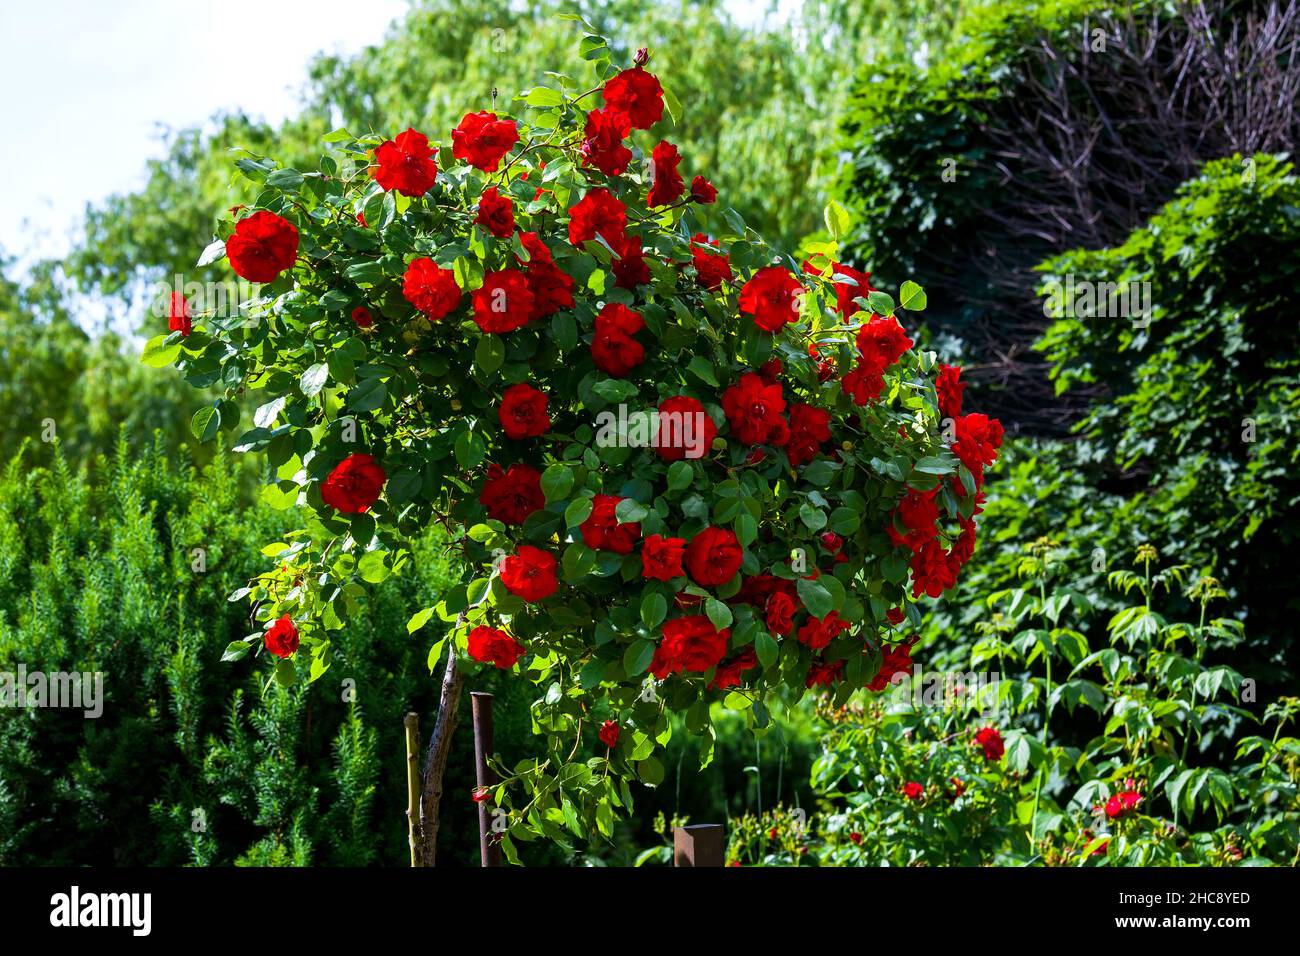 bunch of bush roses with red blooming buds against the backyard green trees lit by sunlight, landscape design with manicured plants close-up, nobody. Stock Photo